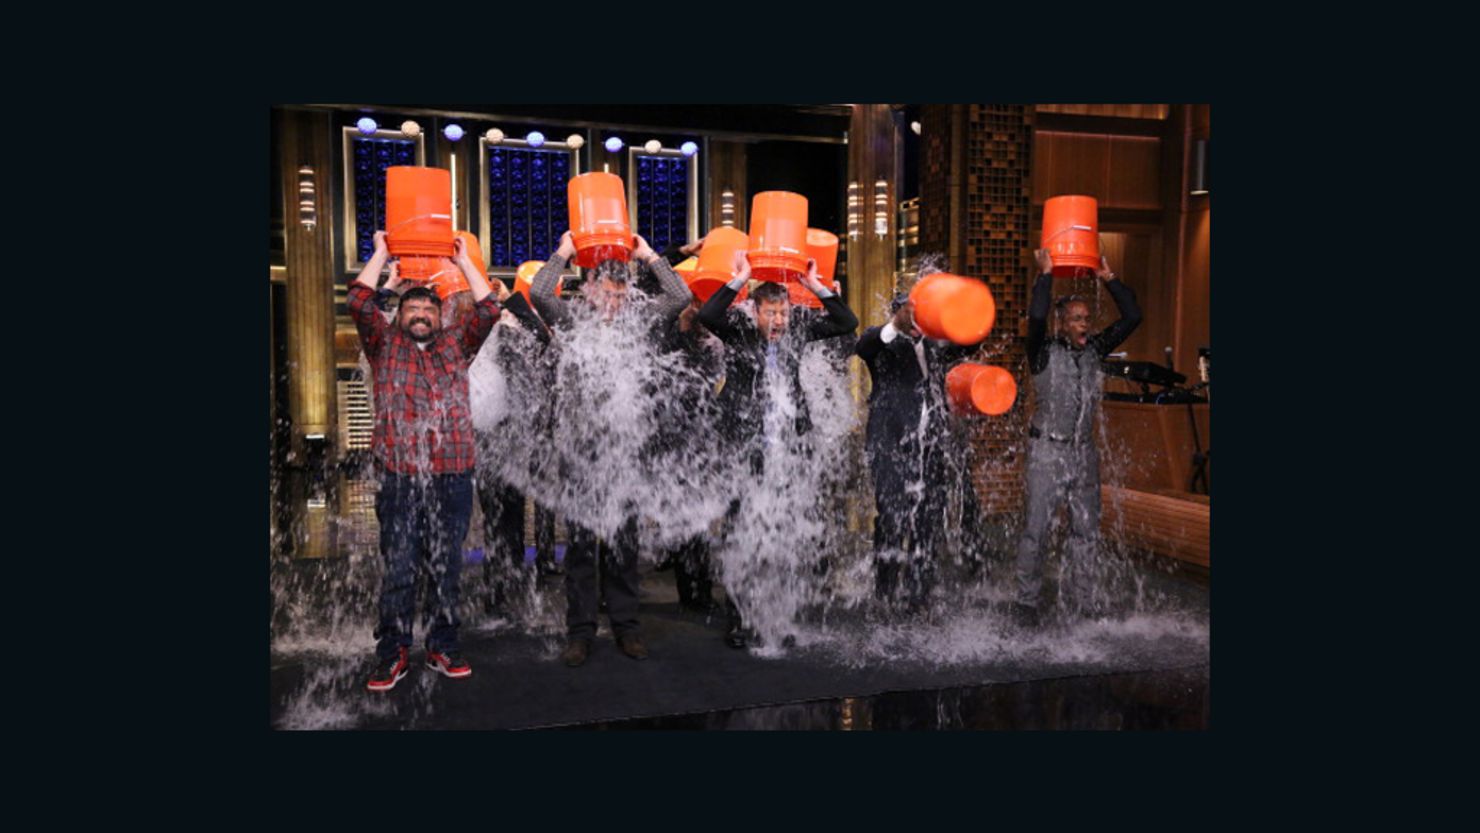 Jimmy Fallon, host of "The Tonight Show," and members of his house band, The Roots, took the Ice Bucket Challenge.